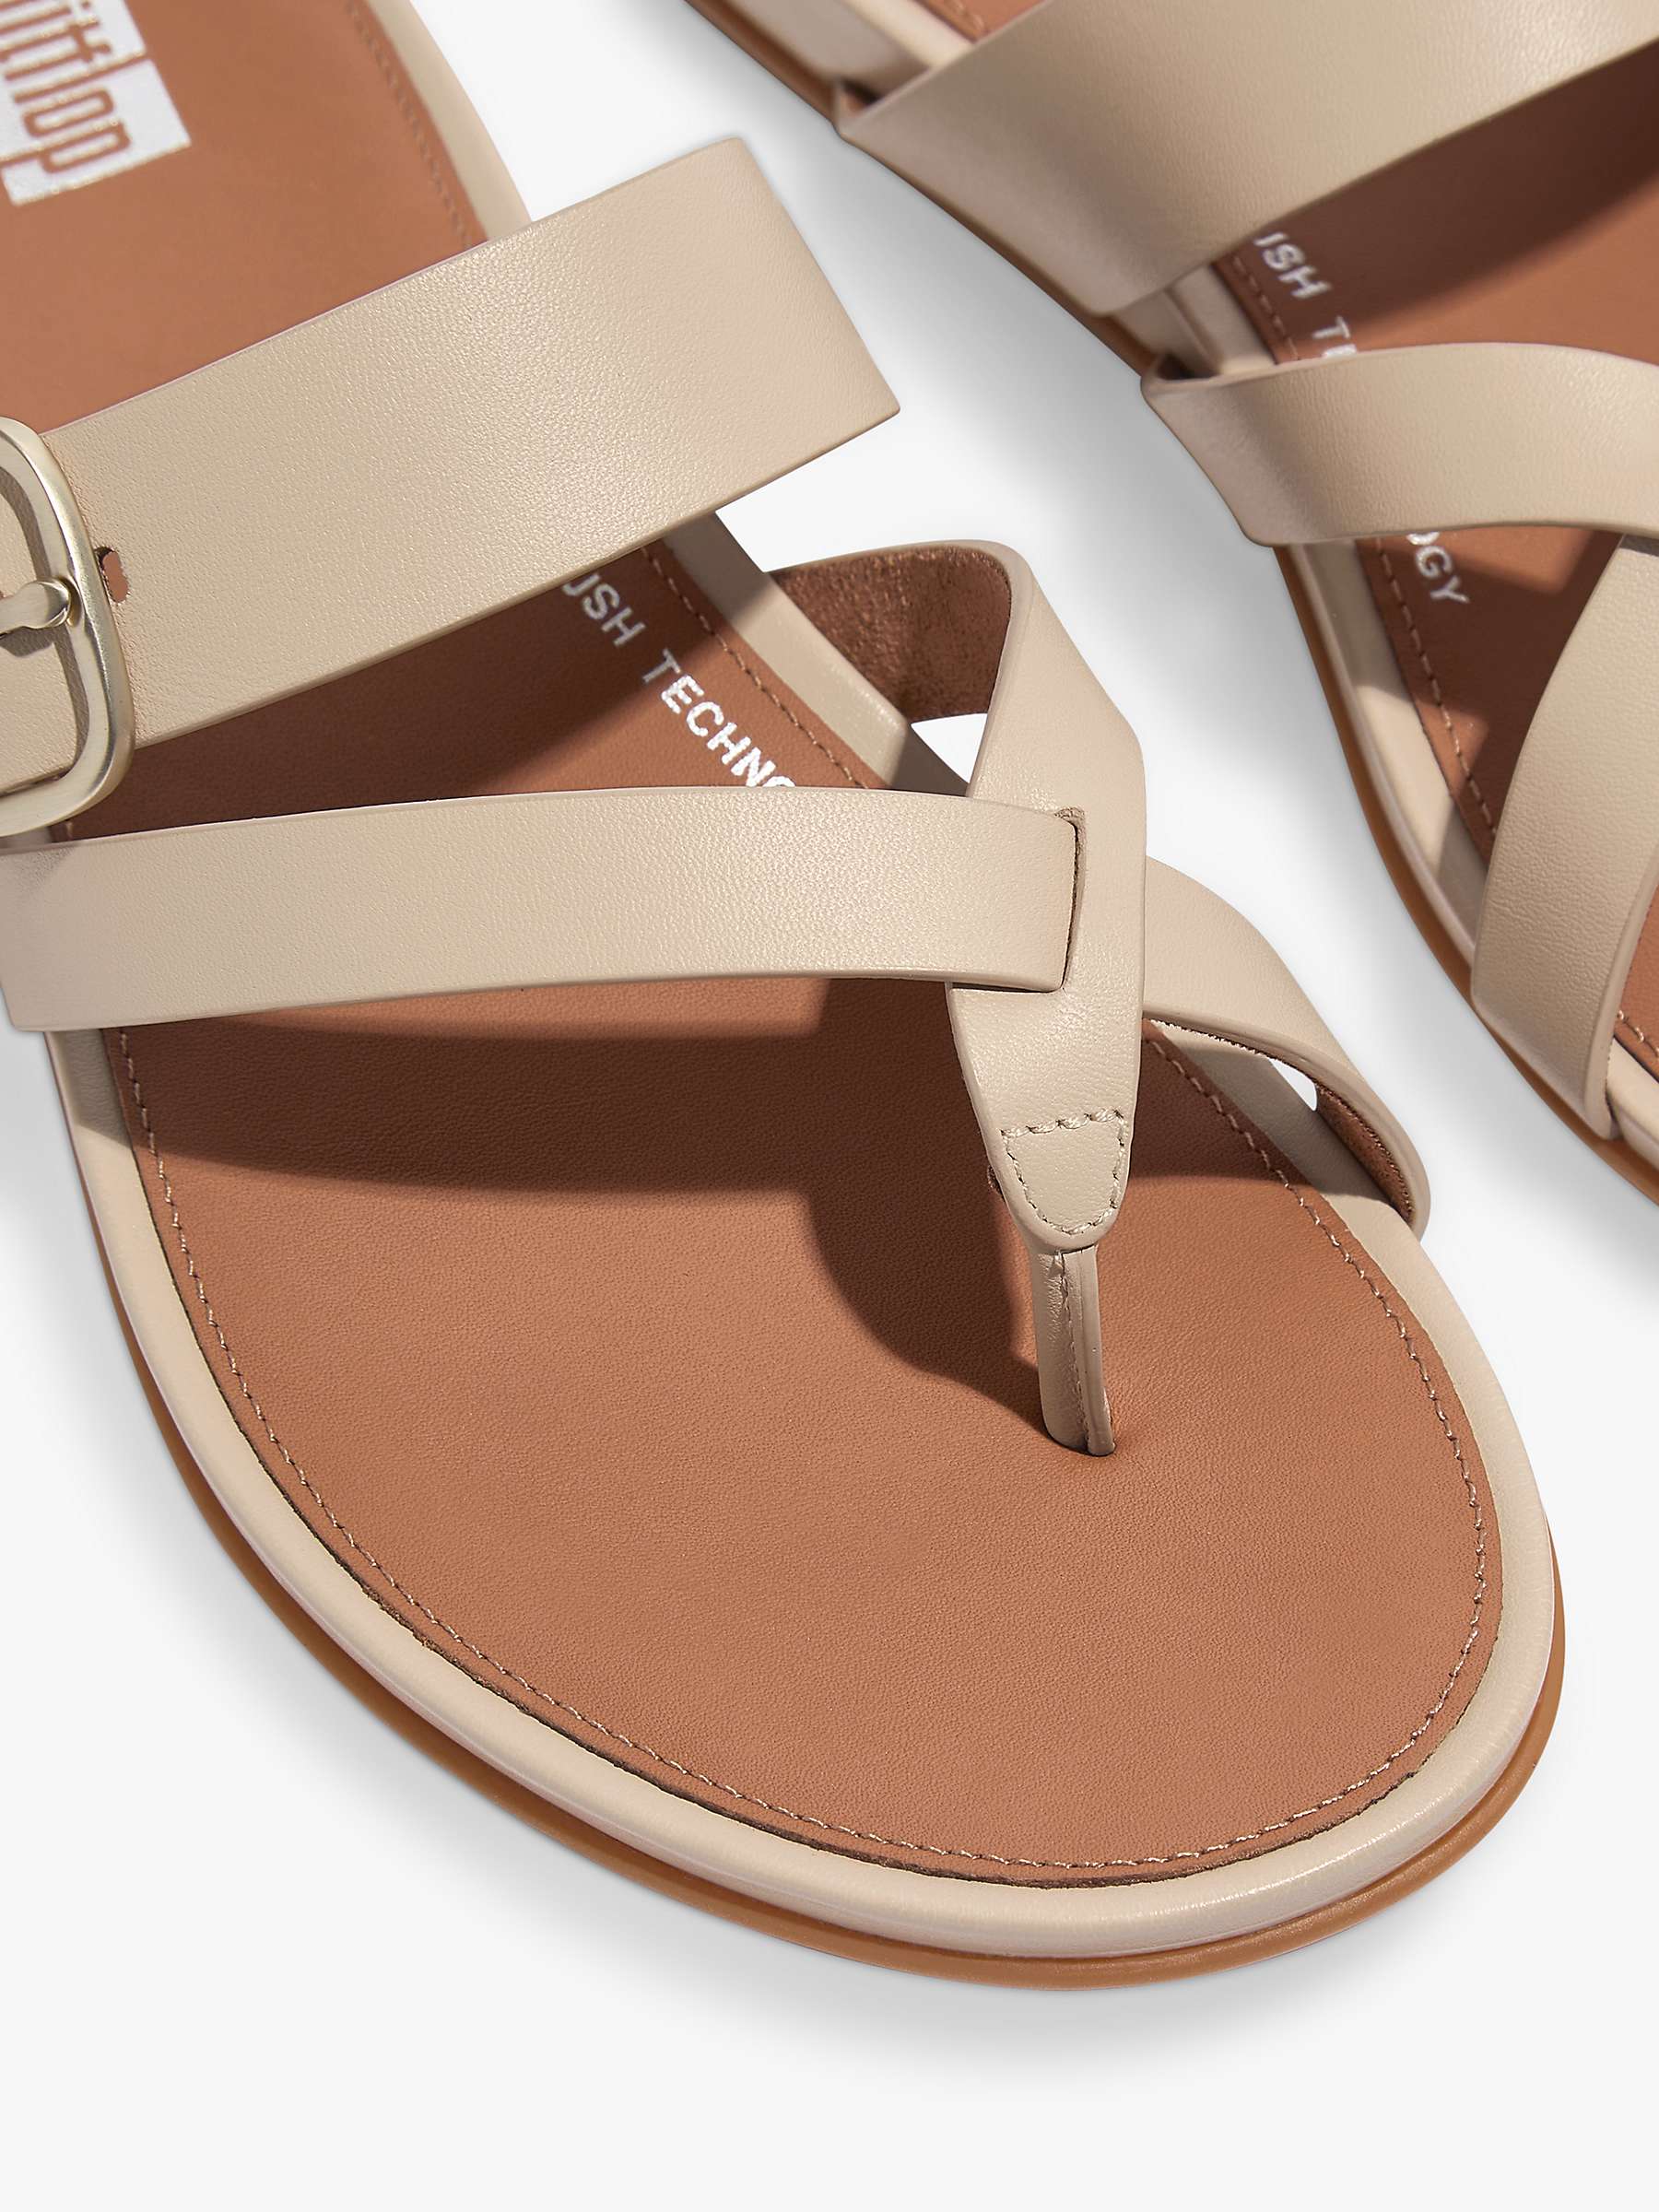 Buy FitFlop Gracie Leather Strappy Toe Post Sandals Online at johnlewis.com